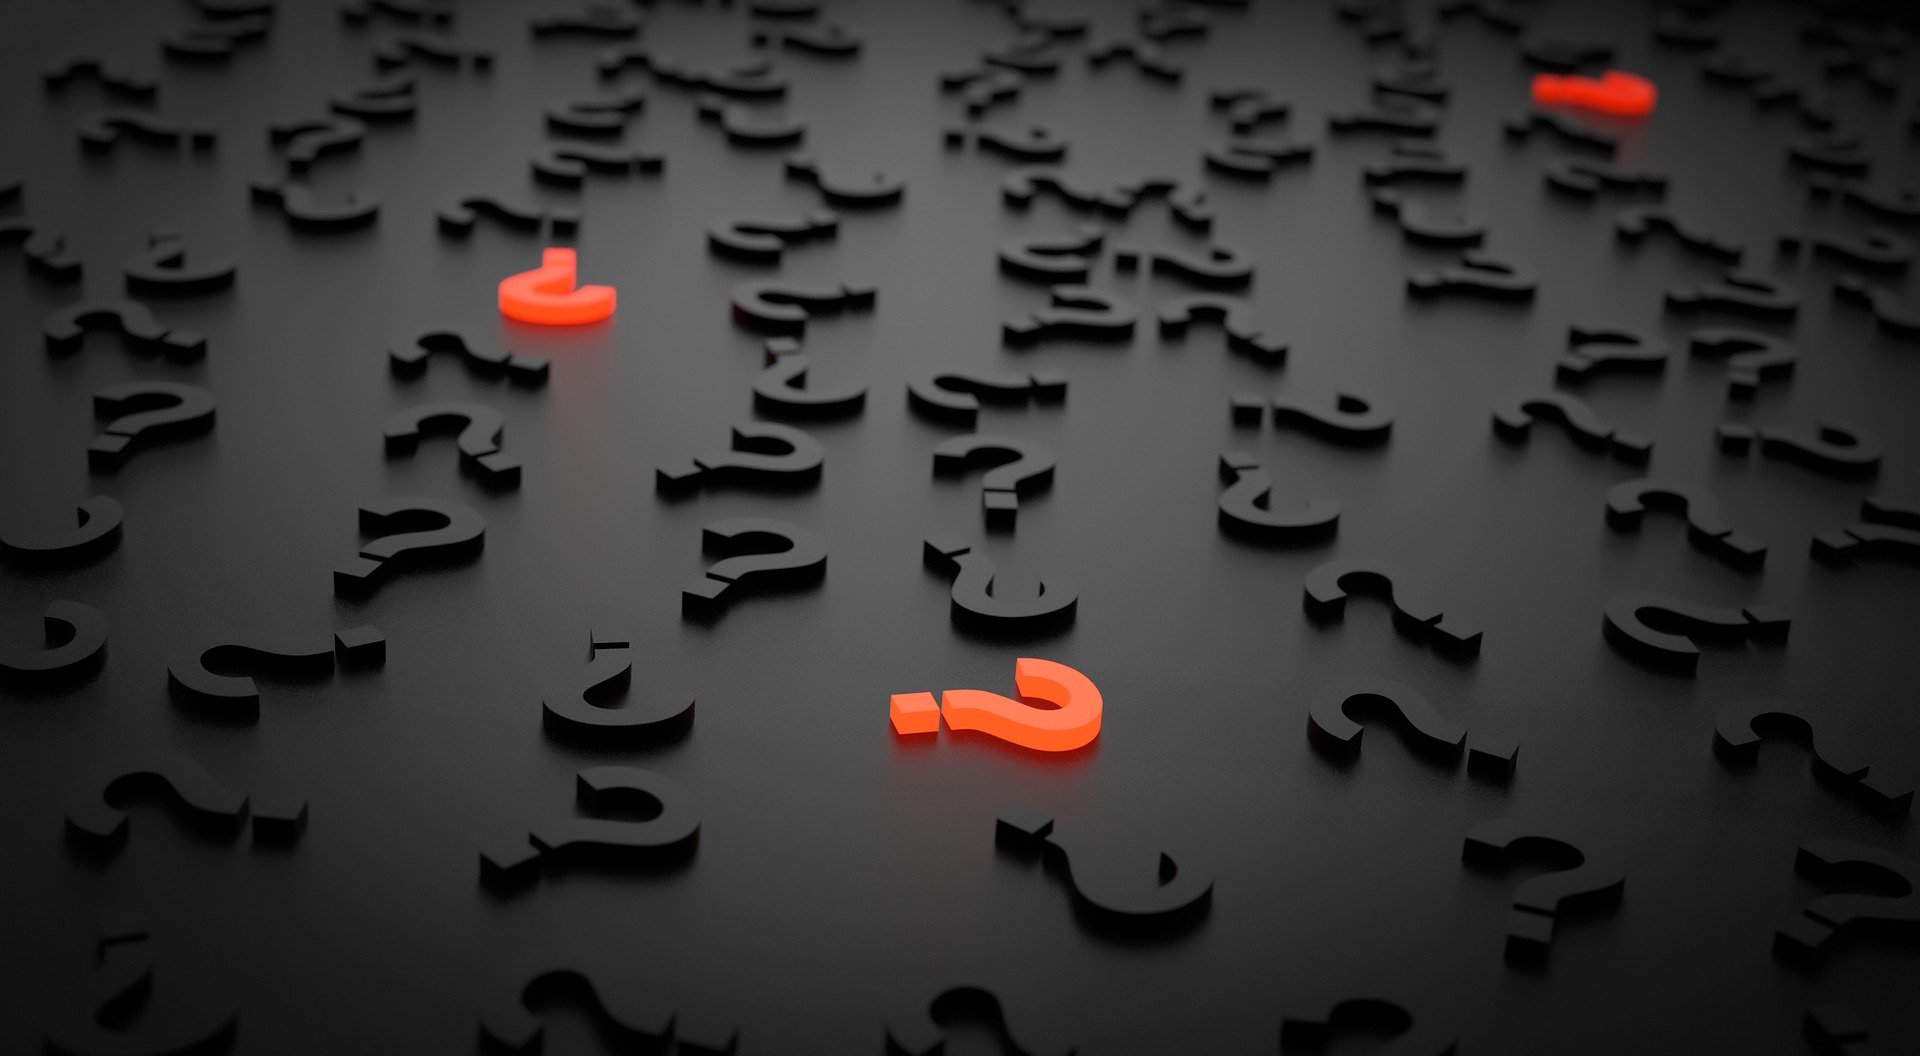 Black question marks are scattered with a few red questions in between. | Photo: Pixabay.com/Arek Socha